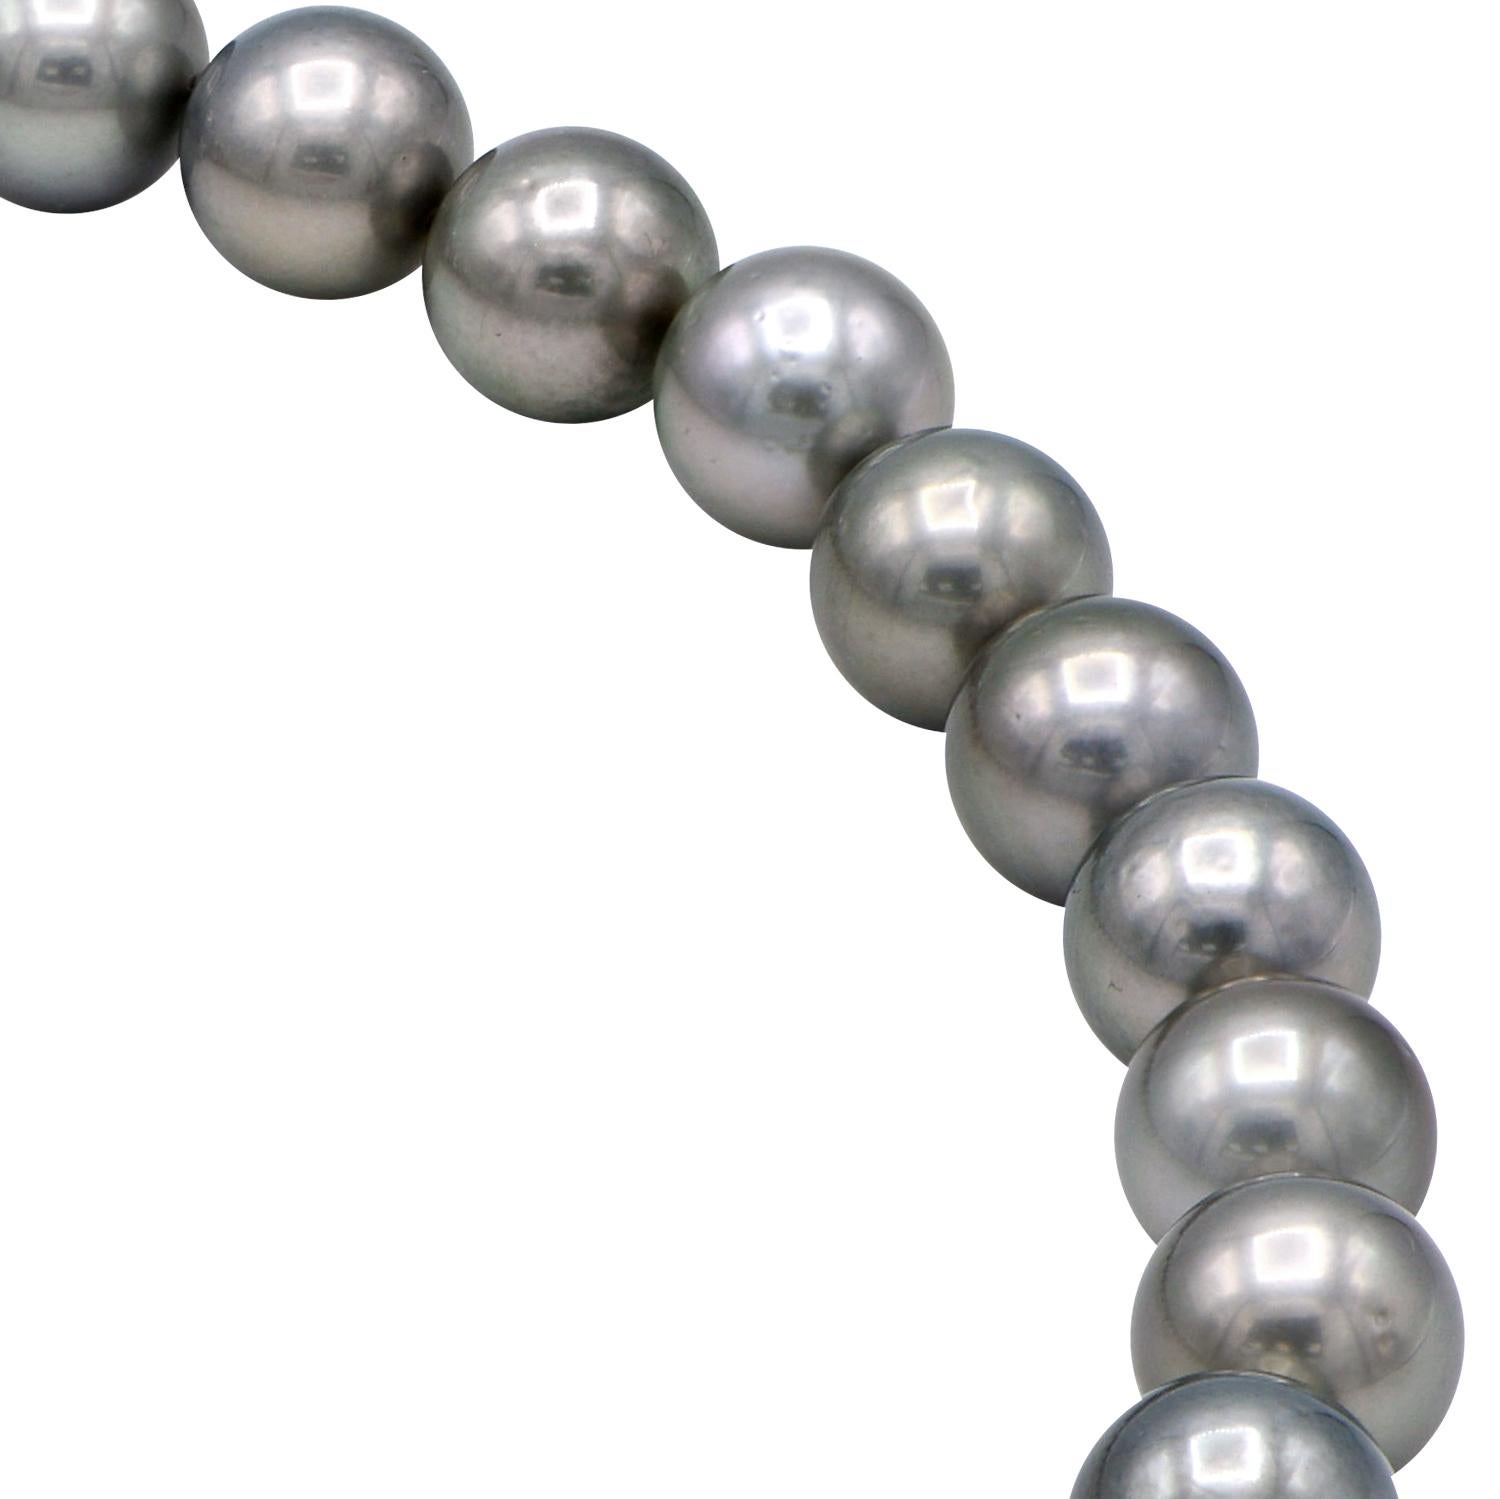 Contemporary Silver Tahitian Pearl Necklace with 14 Karat White Gold Clasp